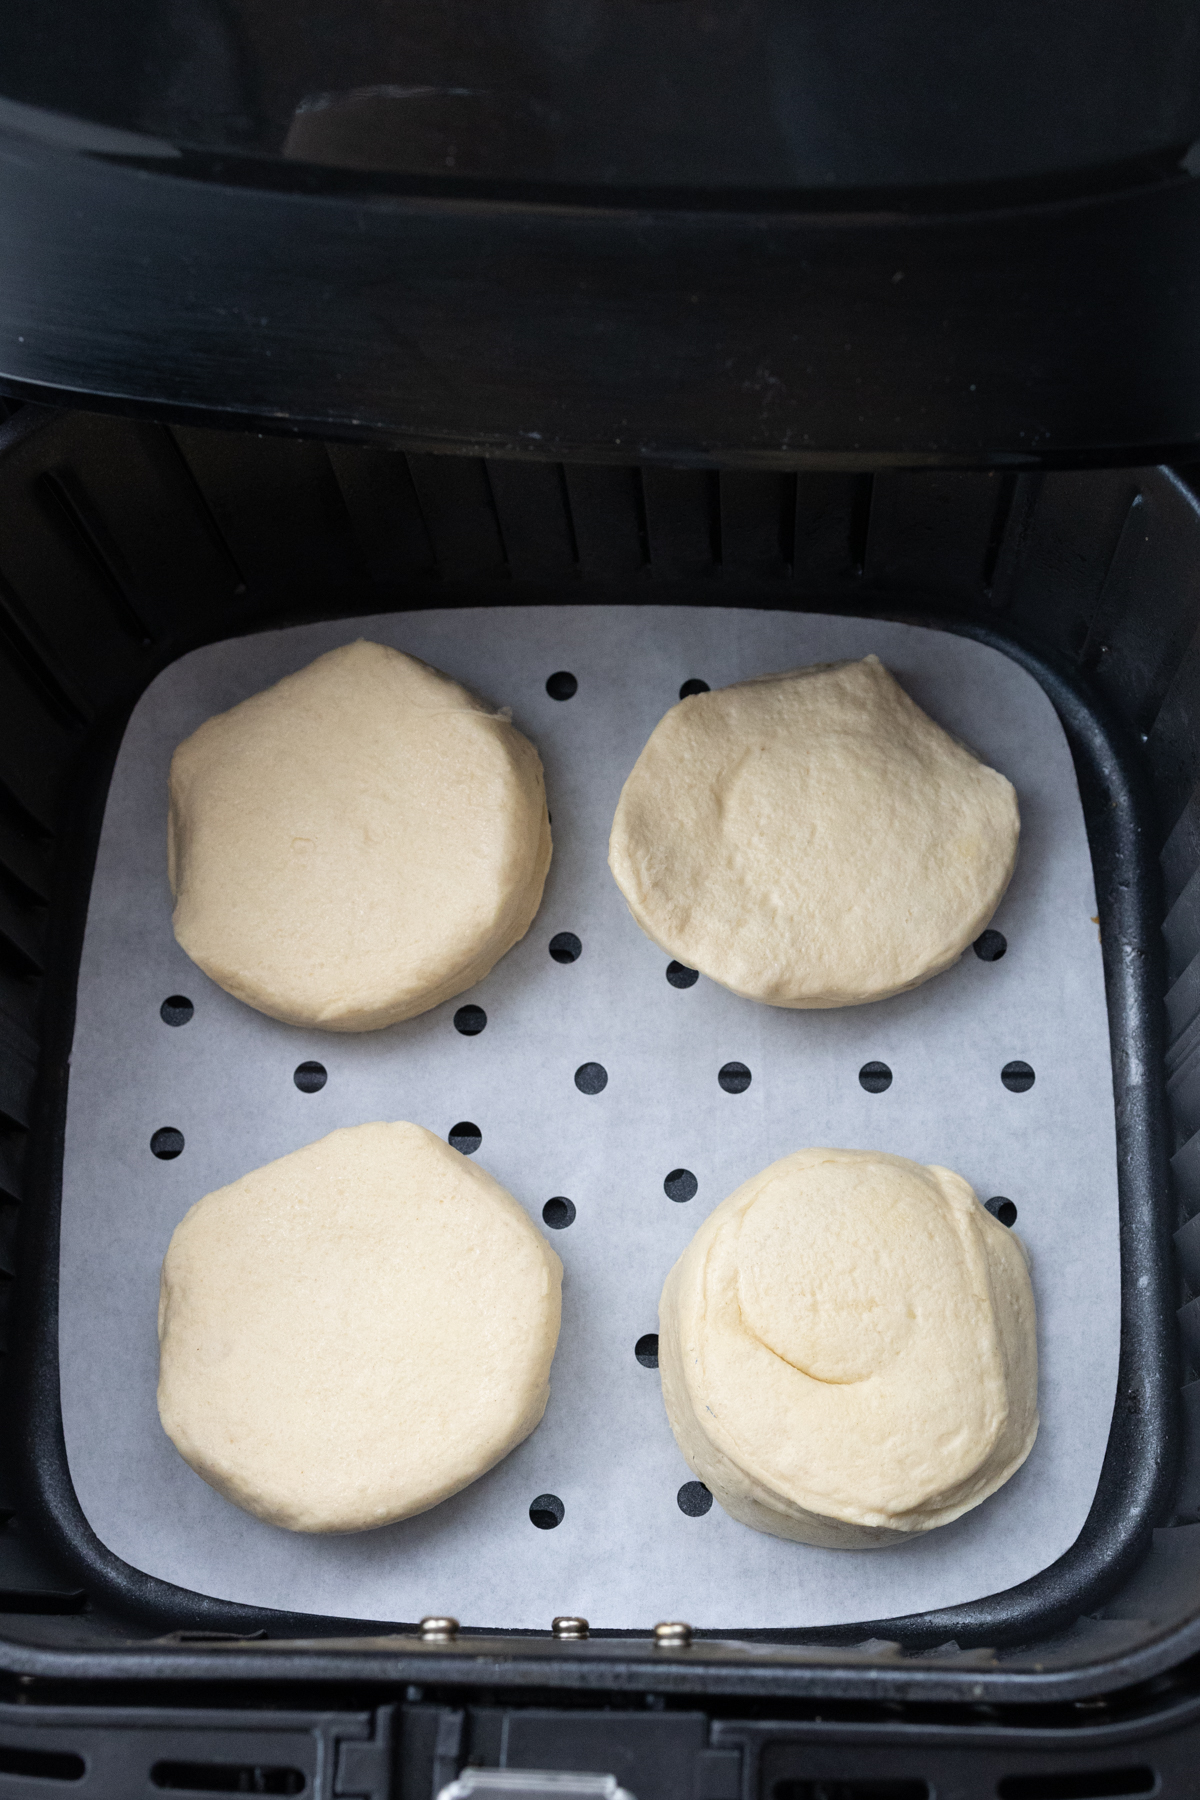 Top view of an open air fryer with four Pillsbury Grand Biscuits in it, ready to cook.